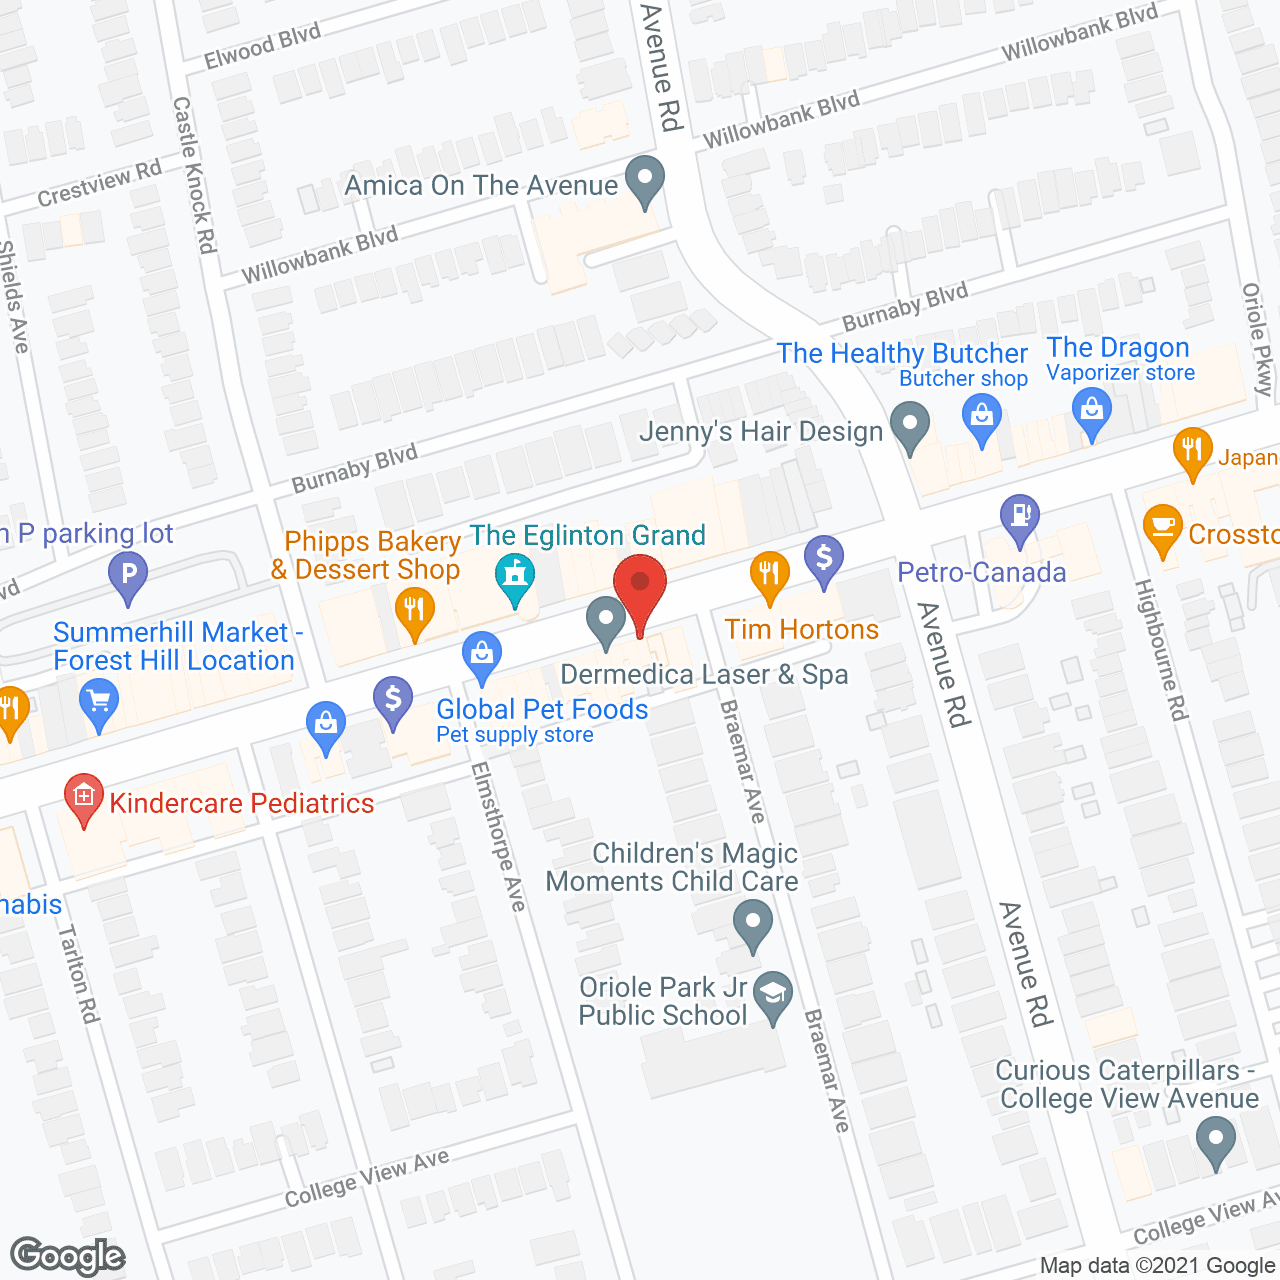 Home Care Assistance - Toronto in google map